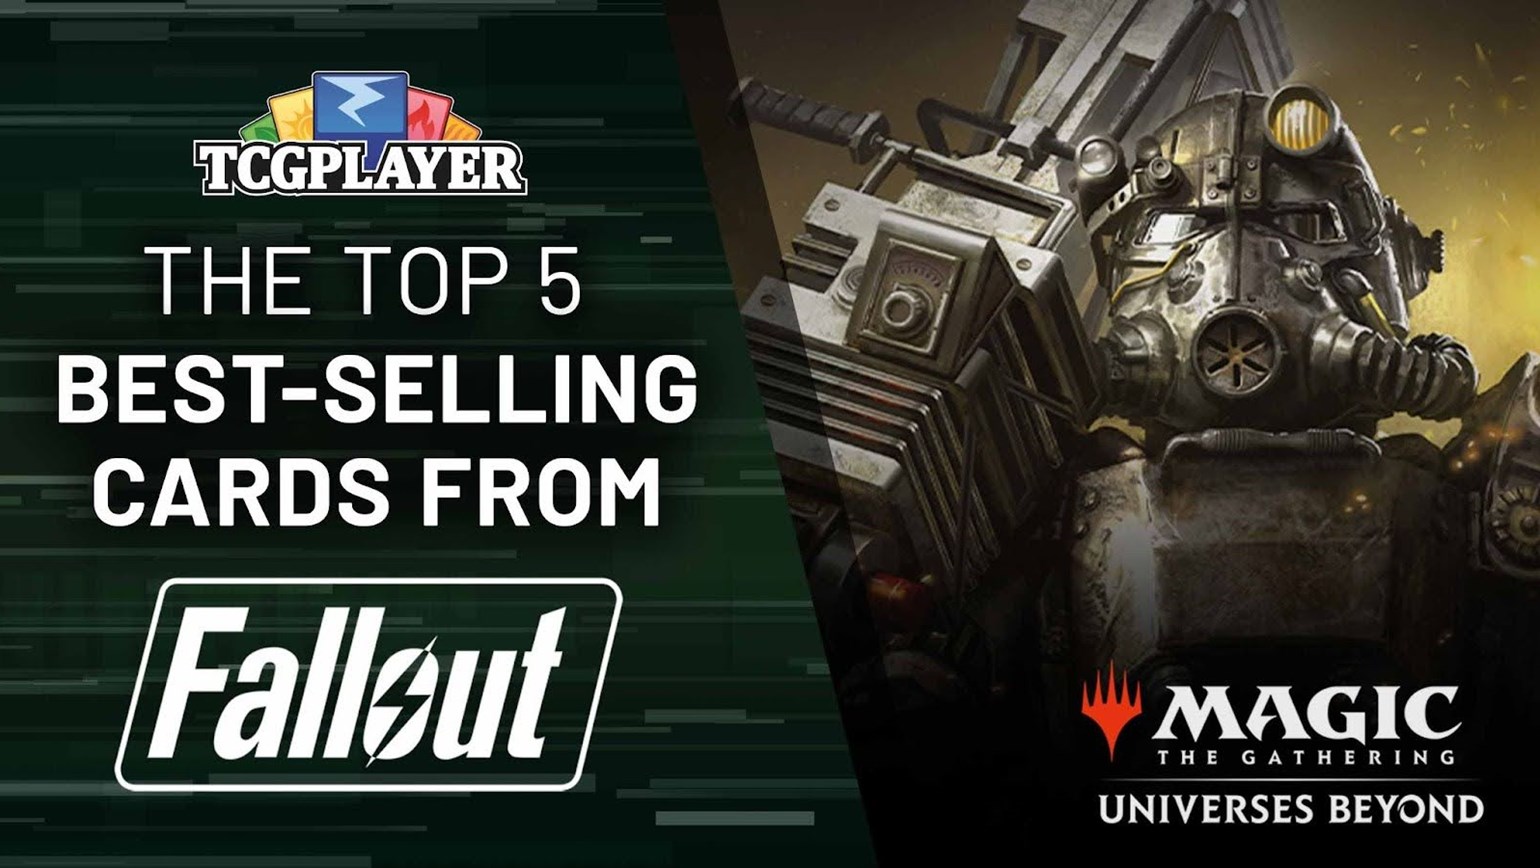 The Top 5 Best-Selling Cards of Universes Beyond: Fallout